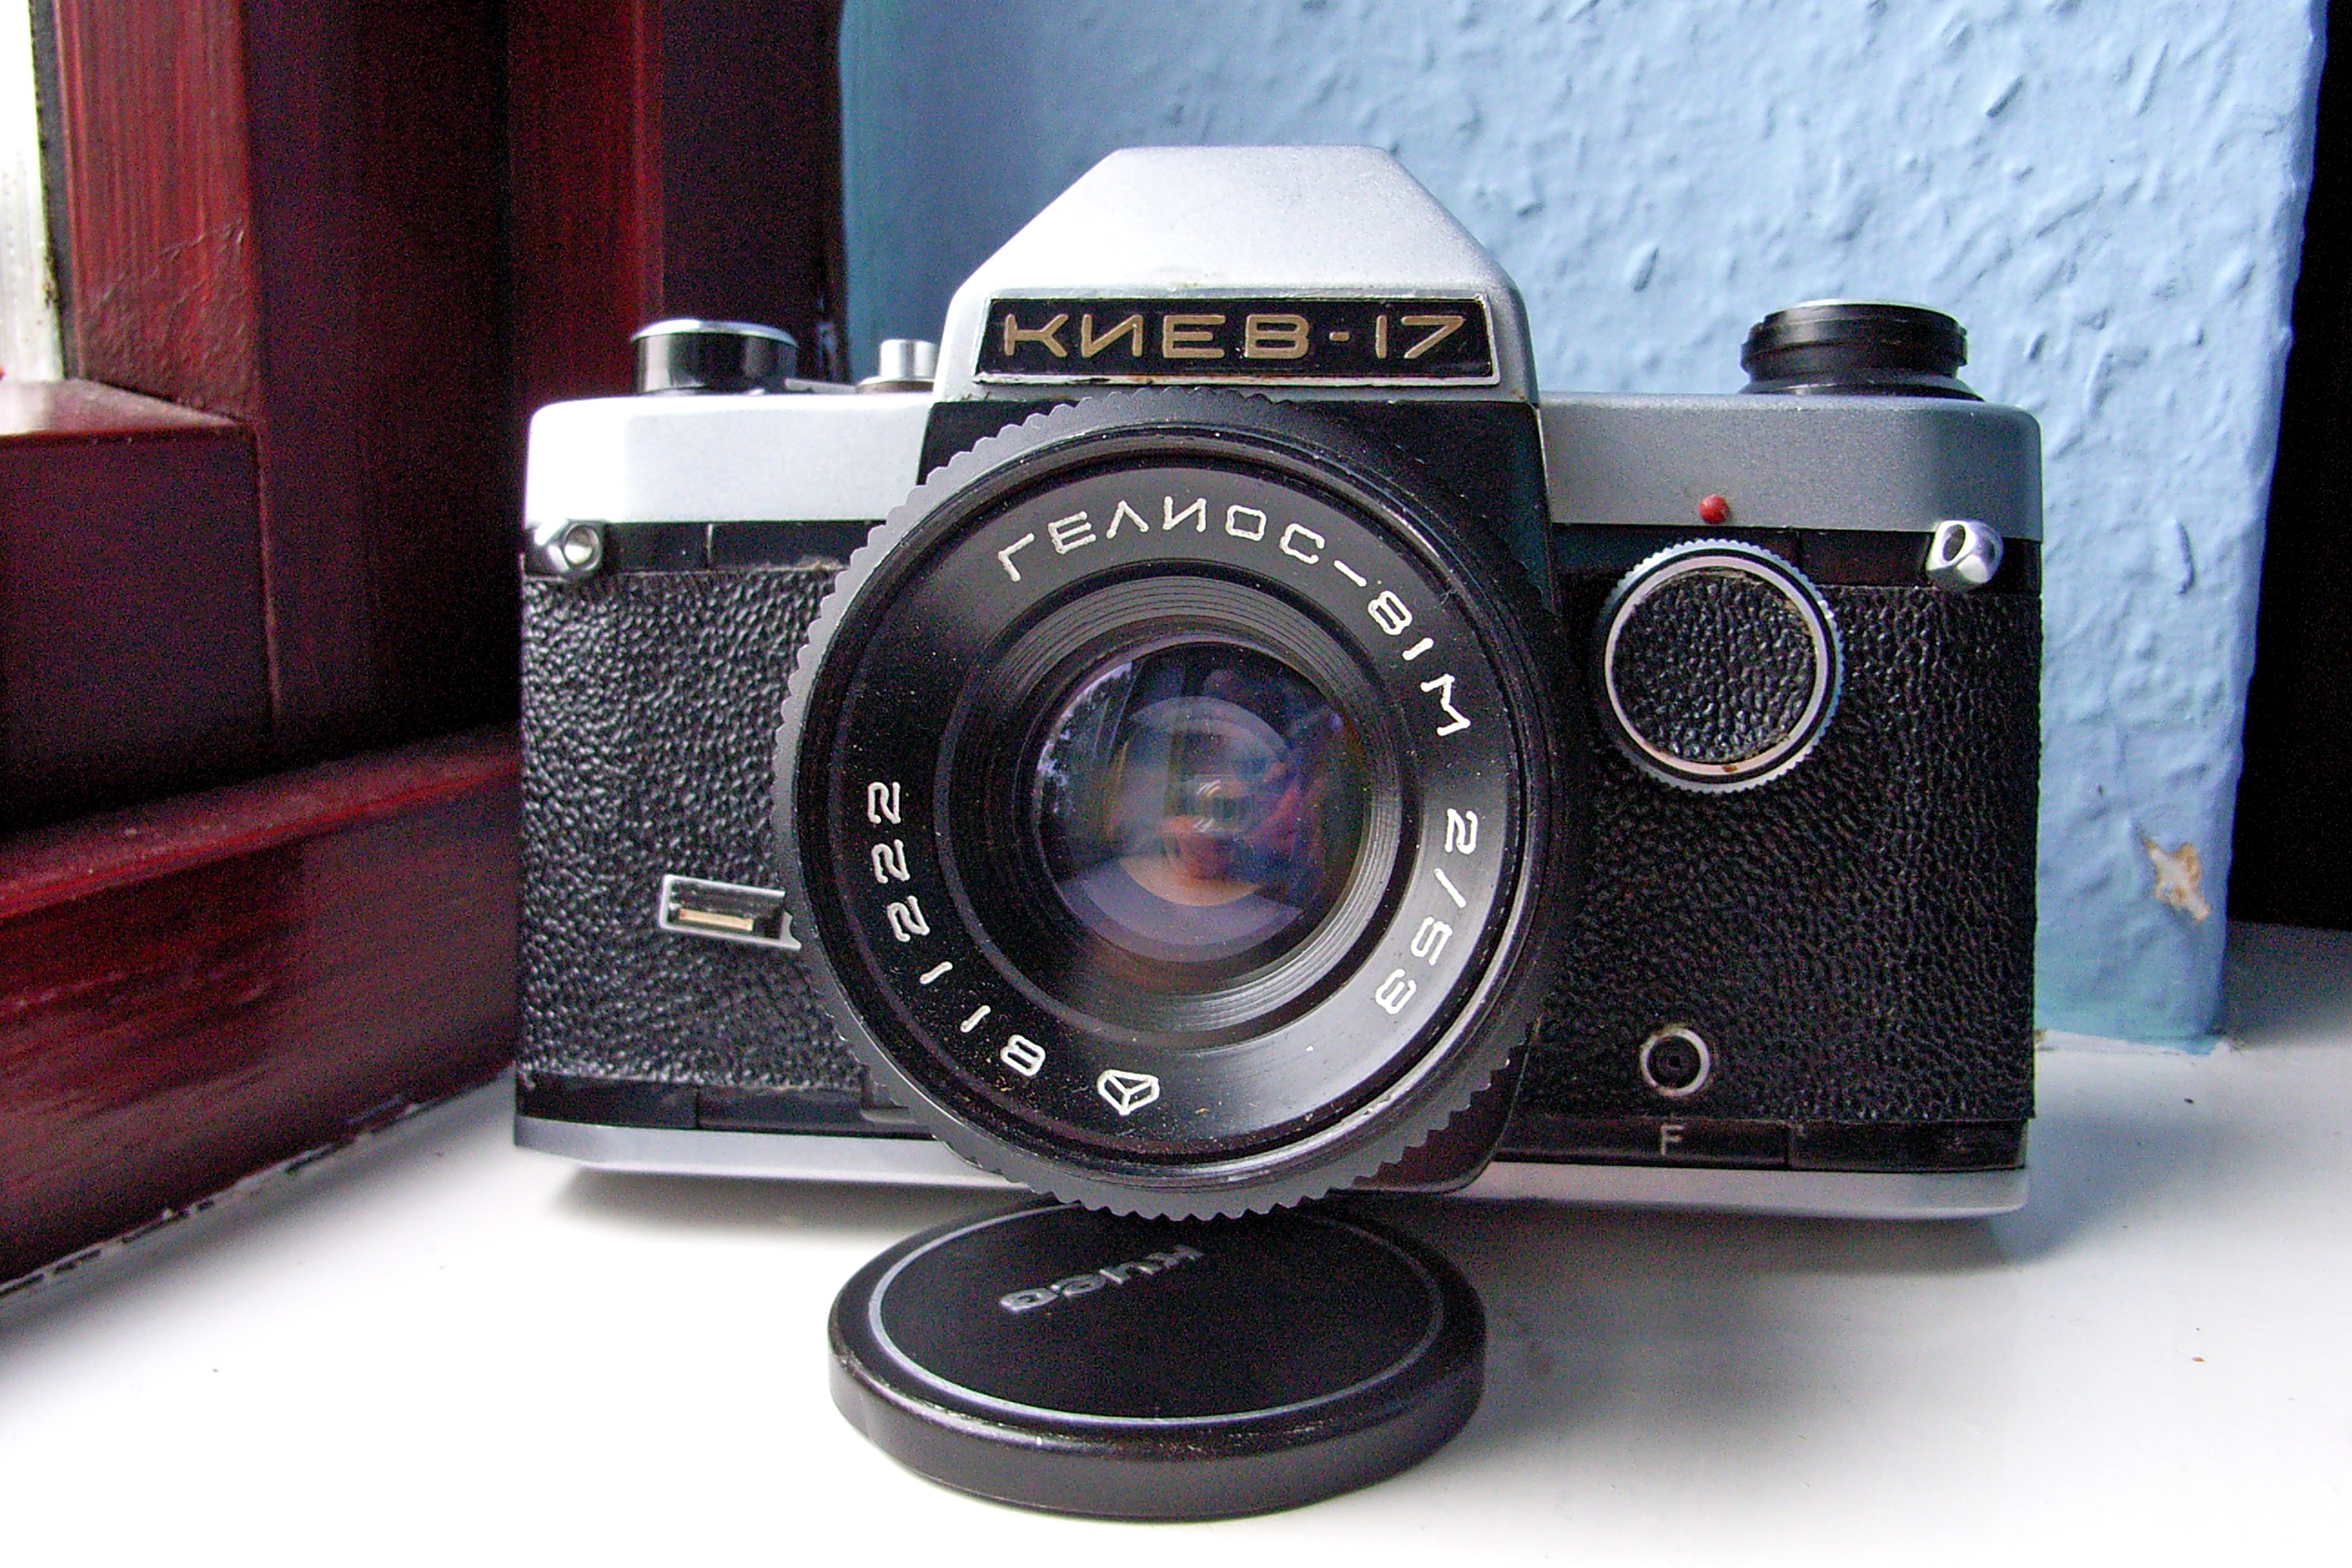 Image of Kiev-17 SLR with Helios-81 lens. Image by David Wright, CC BY 2.0